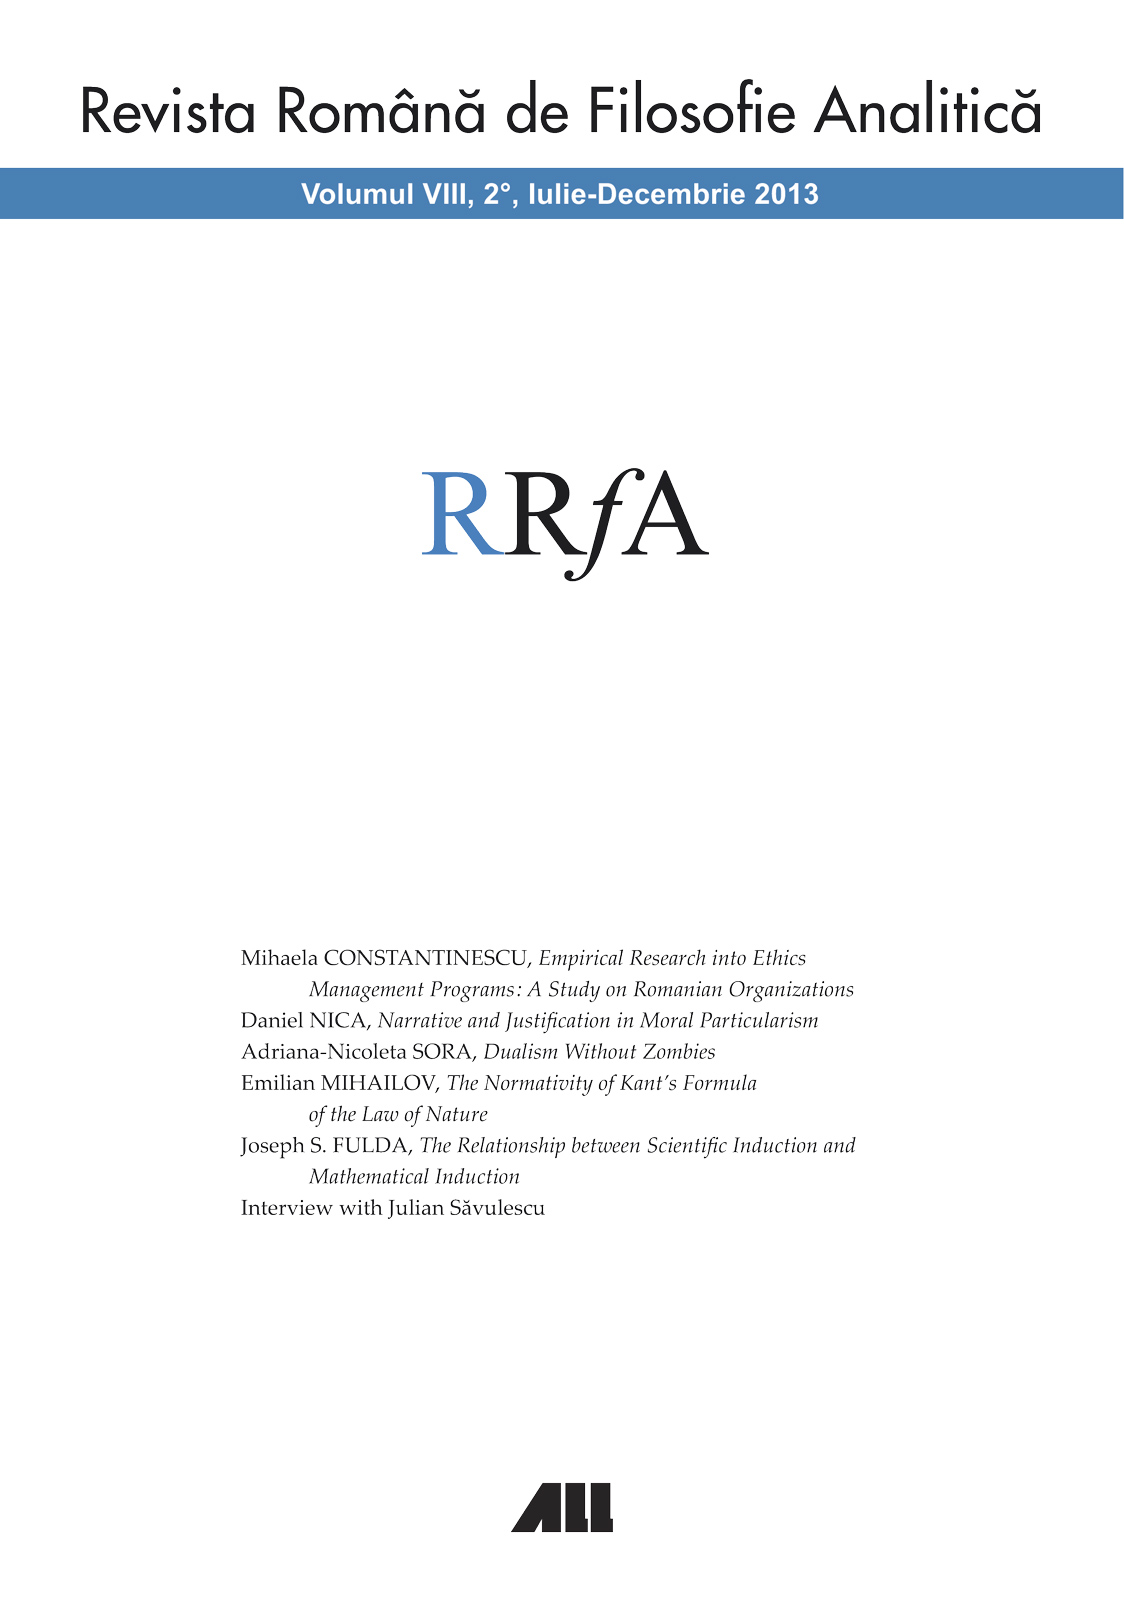 EMPIRICAL RESEARCH INTO ETHICS MANAGEMENT PROGRAMS : A STUDY ON ROMANIAN ORGANIZATIONS Cover Image